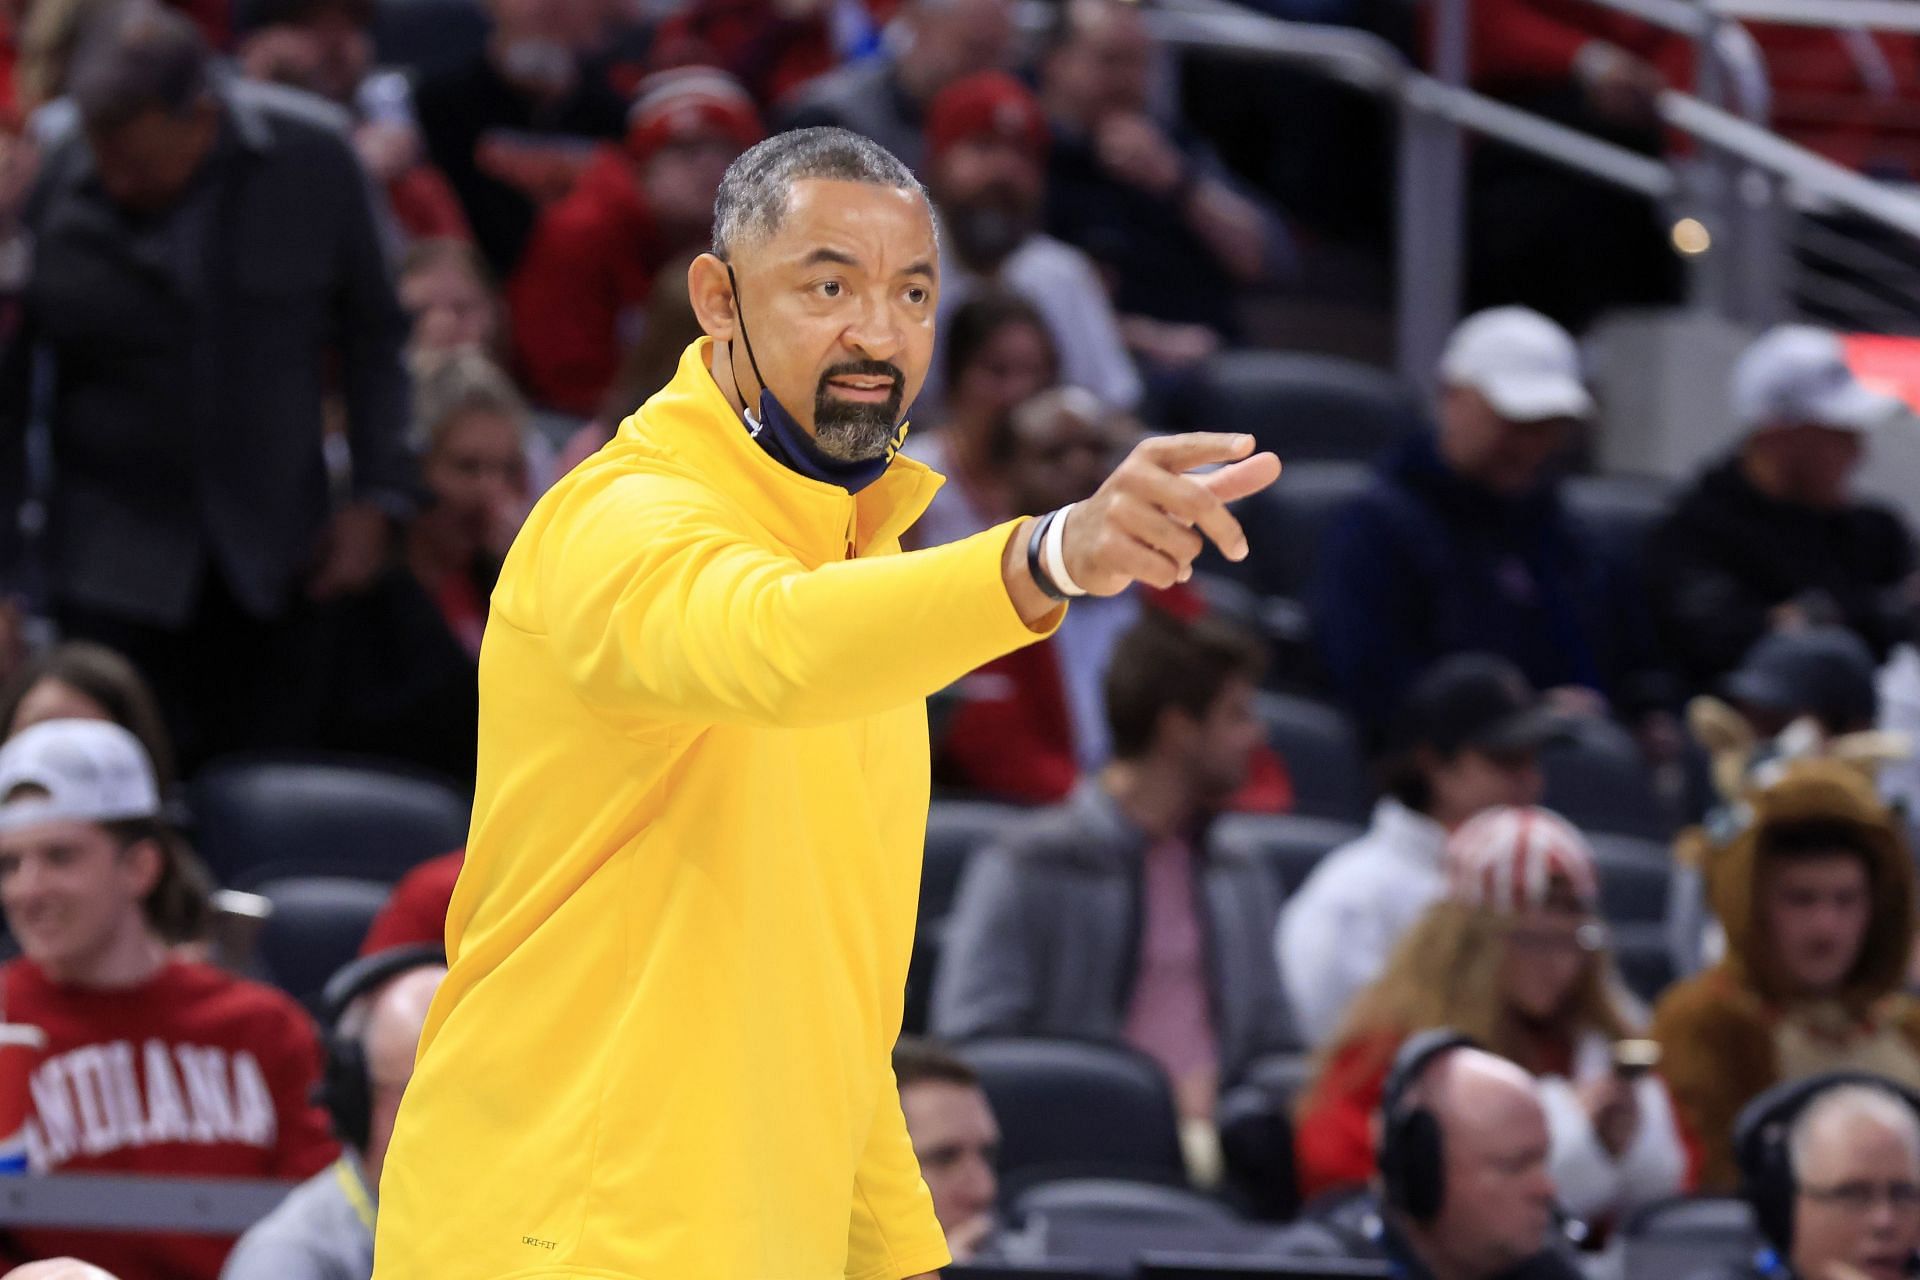 Michigan and Juwan Howard are looking to prove the doubters wrong.